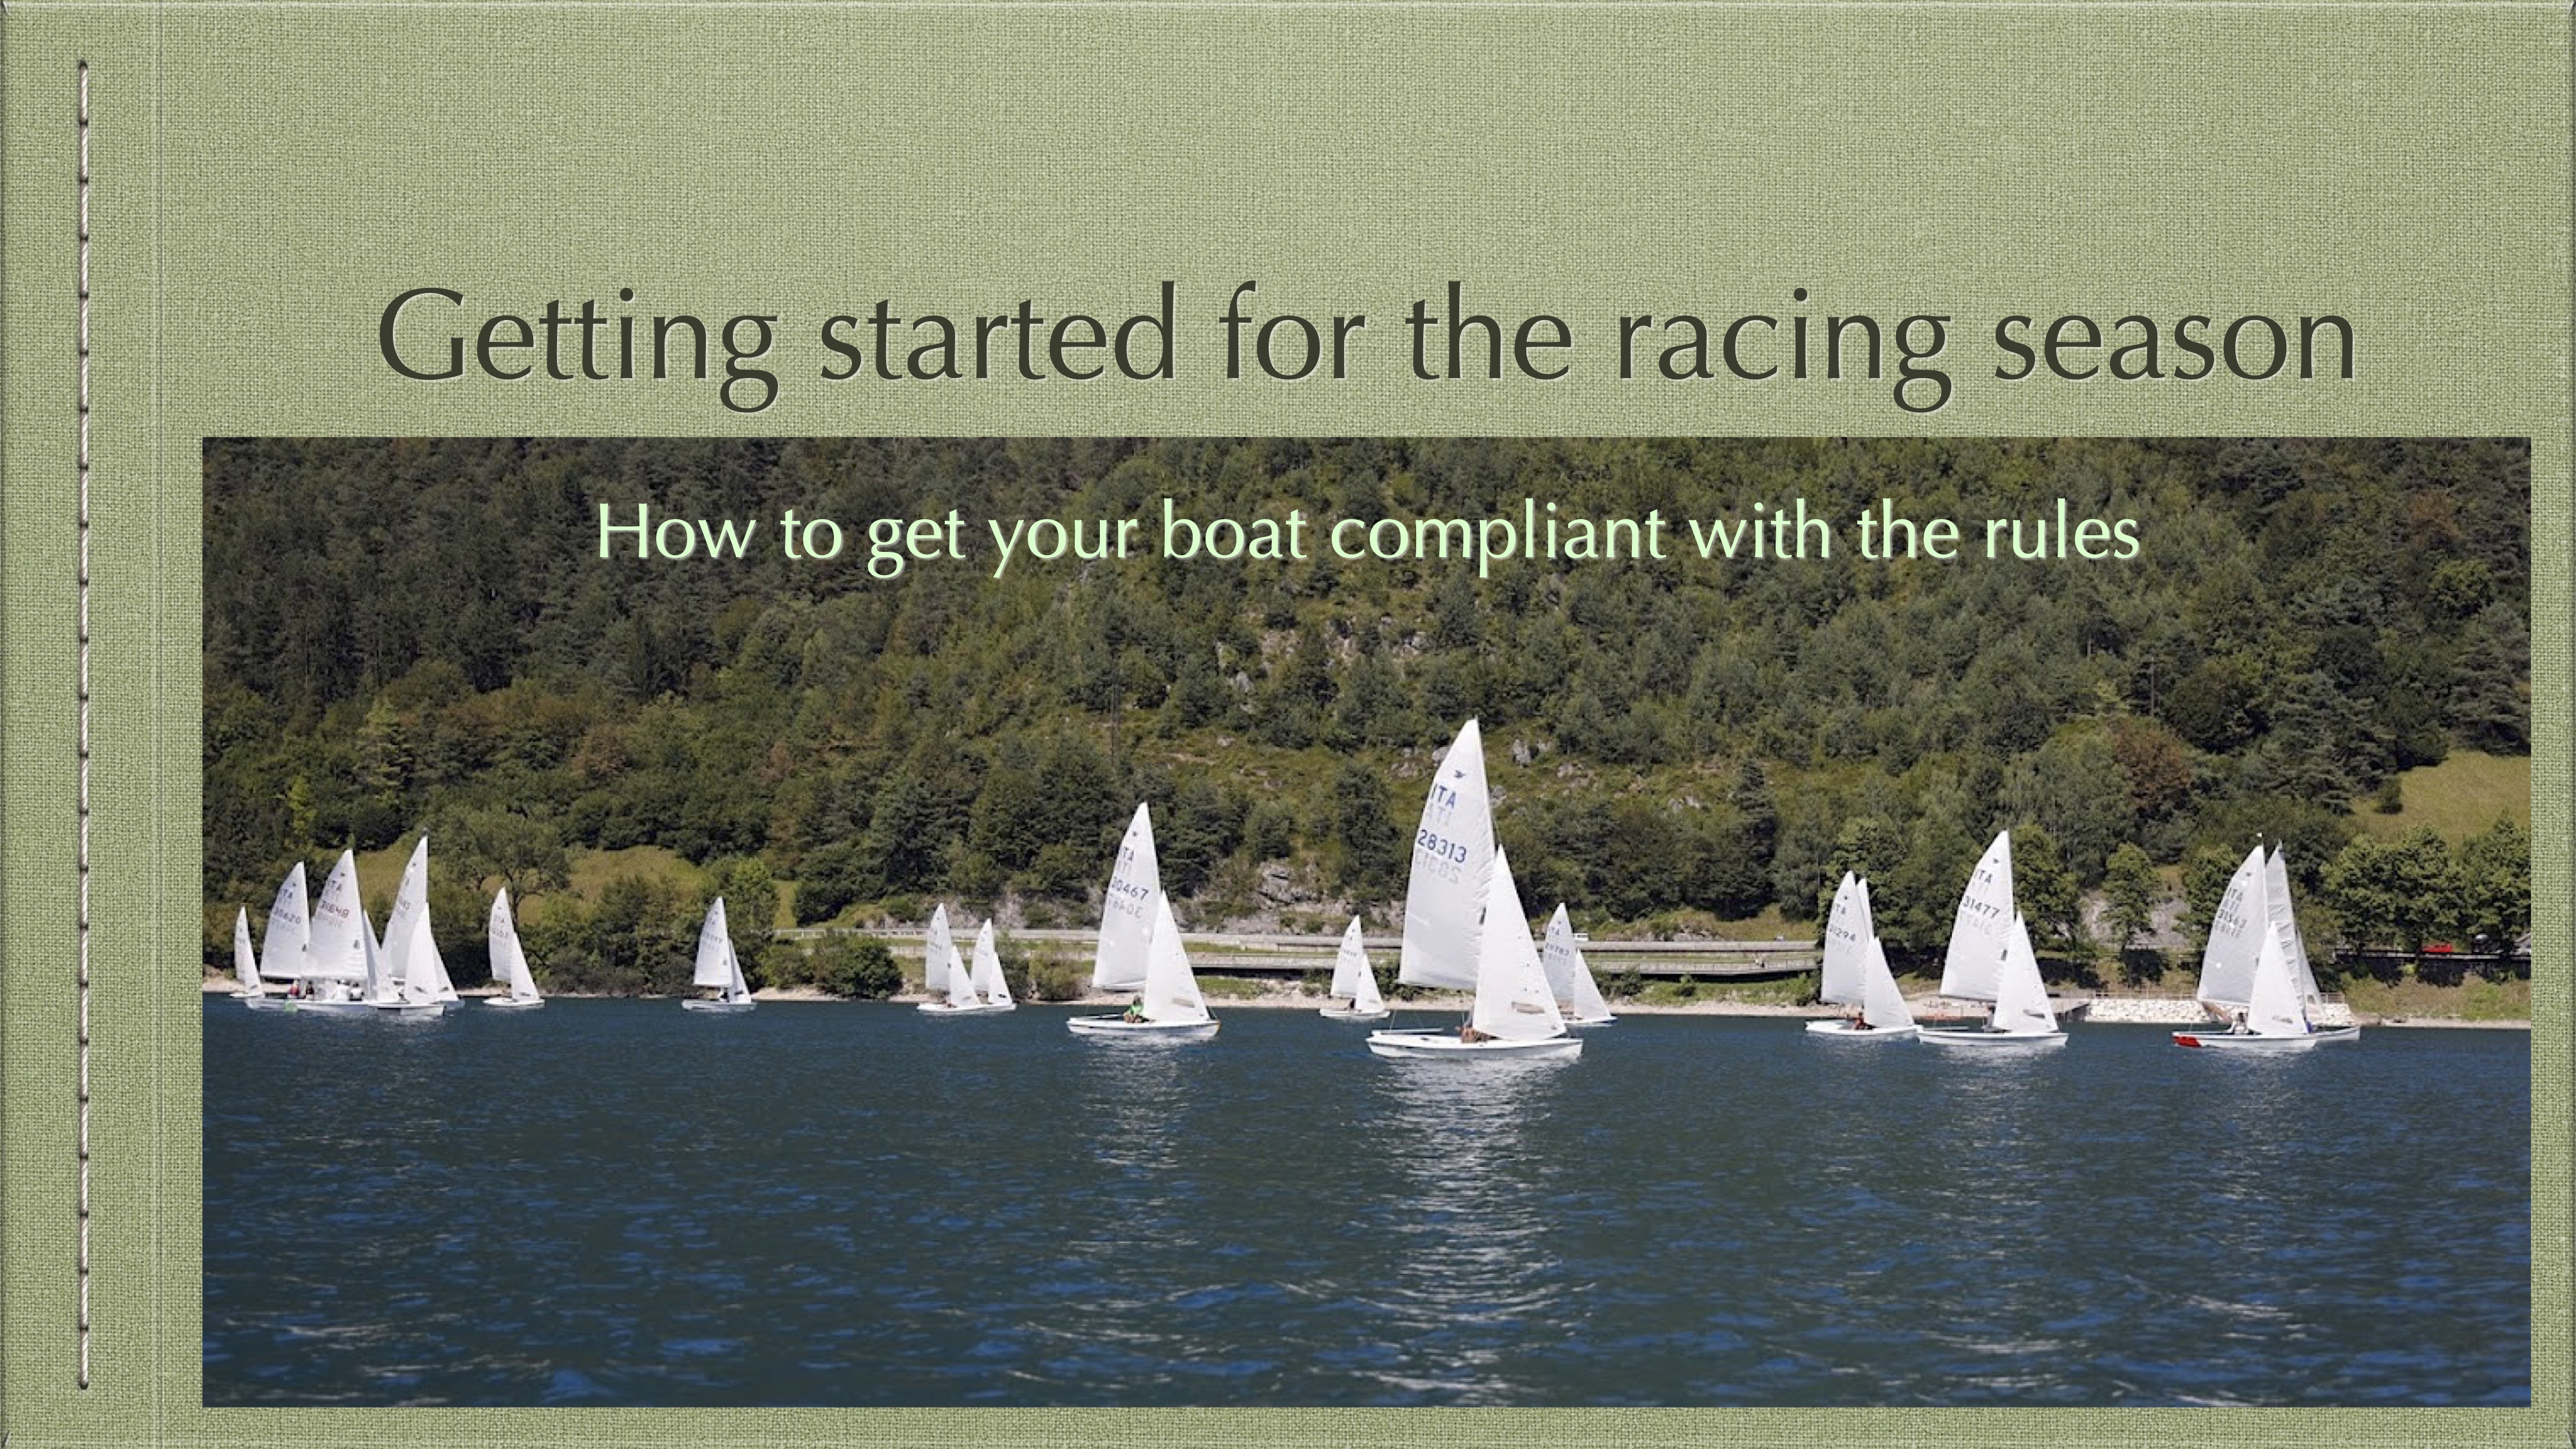 How to Get Your Boat Compliant with the Rules Image